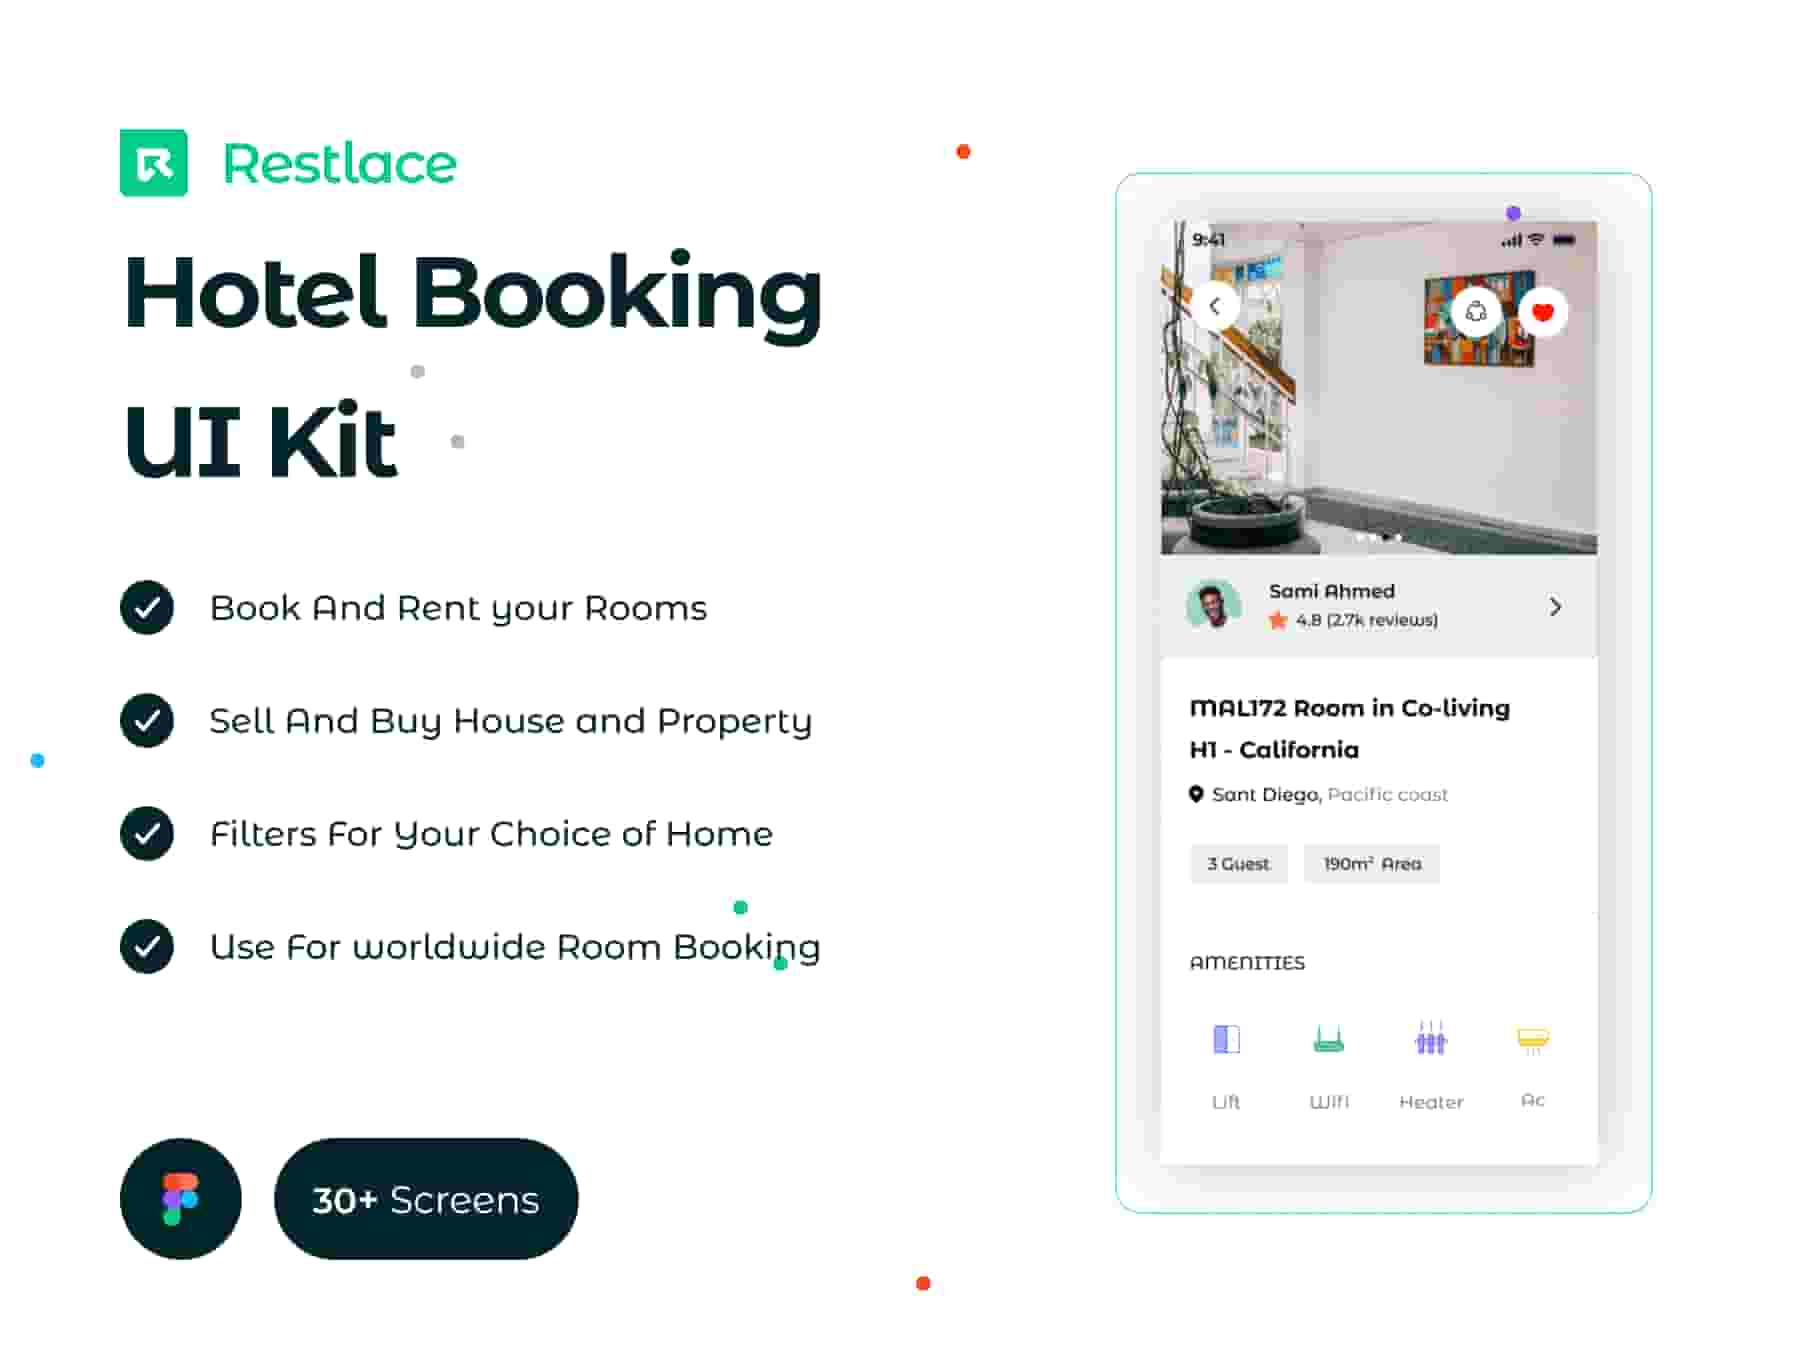 Restlace Hotel Booking App